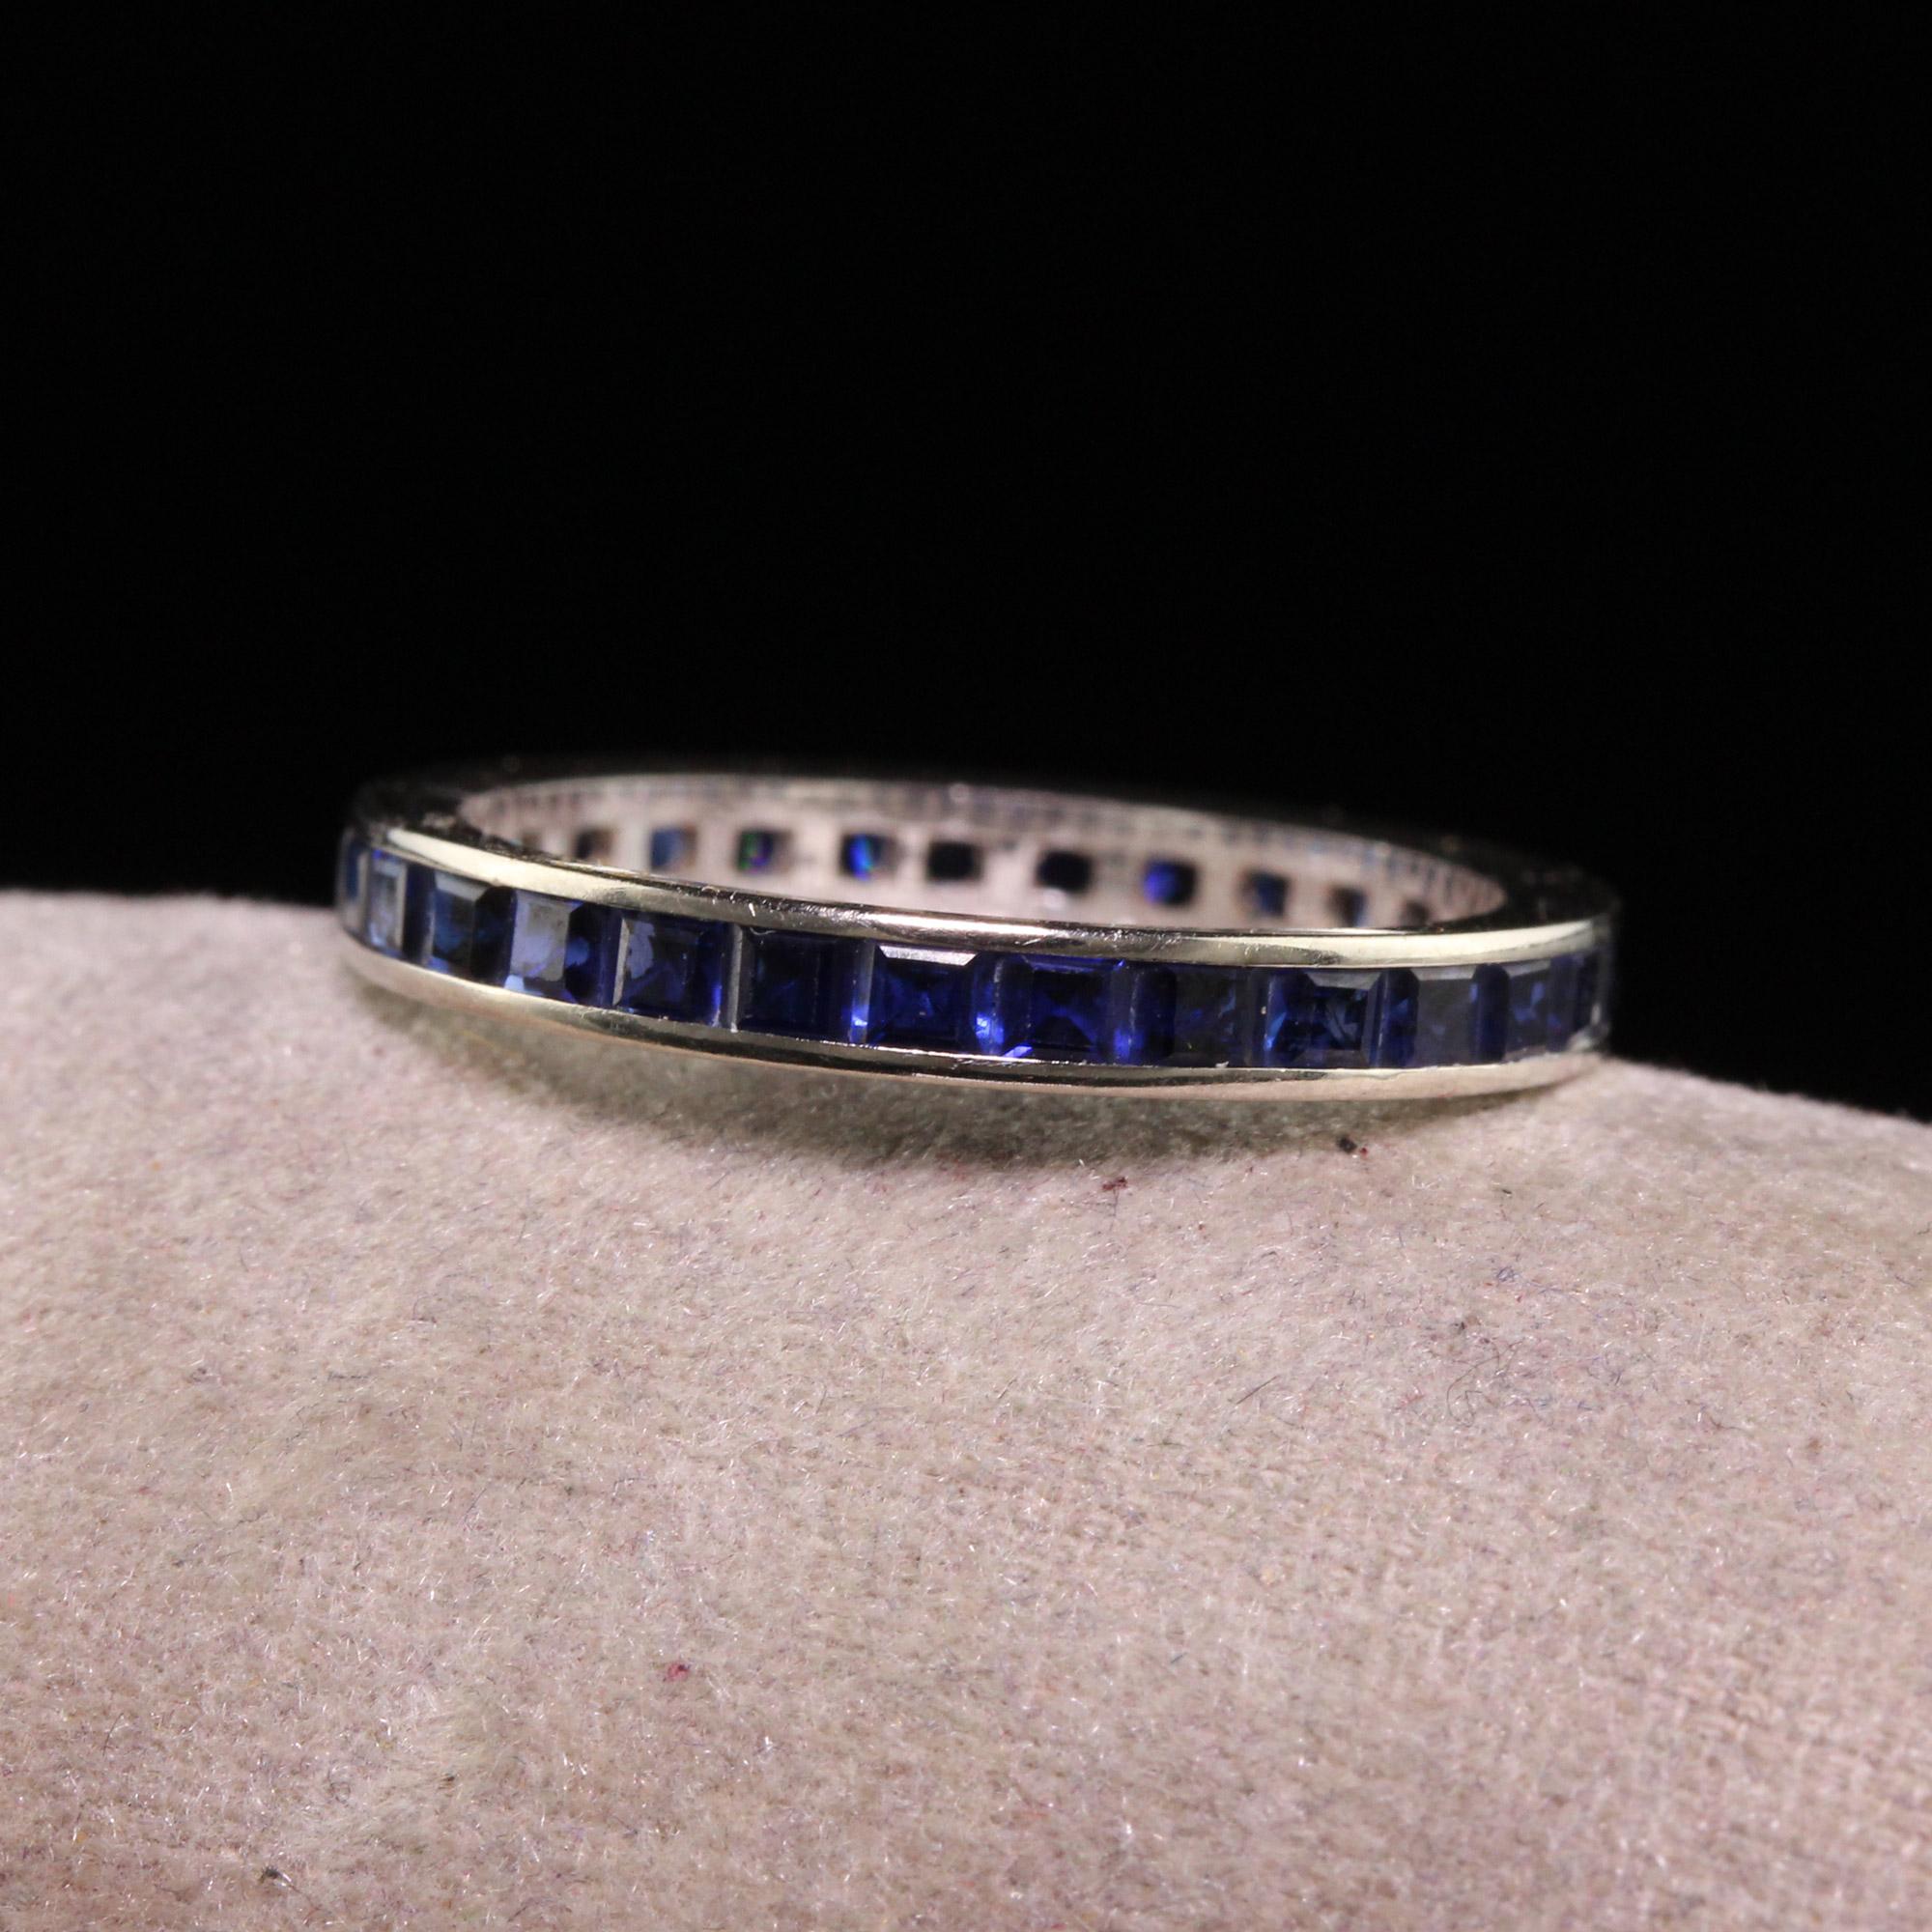 Beautiful Vintage Retro 14K White Gold Square Cut Sapphire Eternity Band - Size 5 1/2. This beautiful eternity band is crafted in 14k white gold. There are square cut sapphires going around the entire ring and is in great condition.

Item